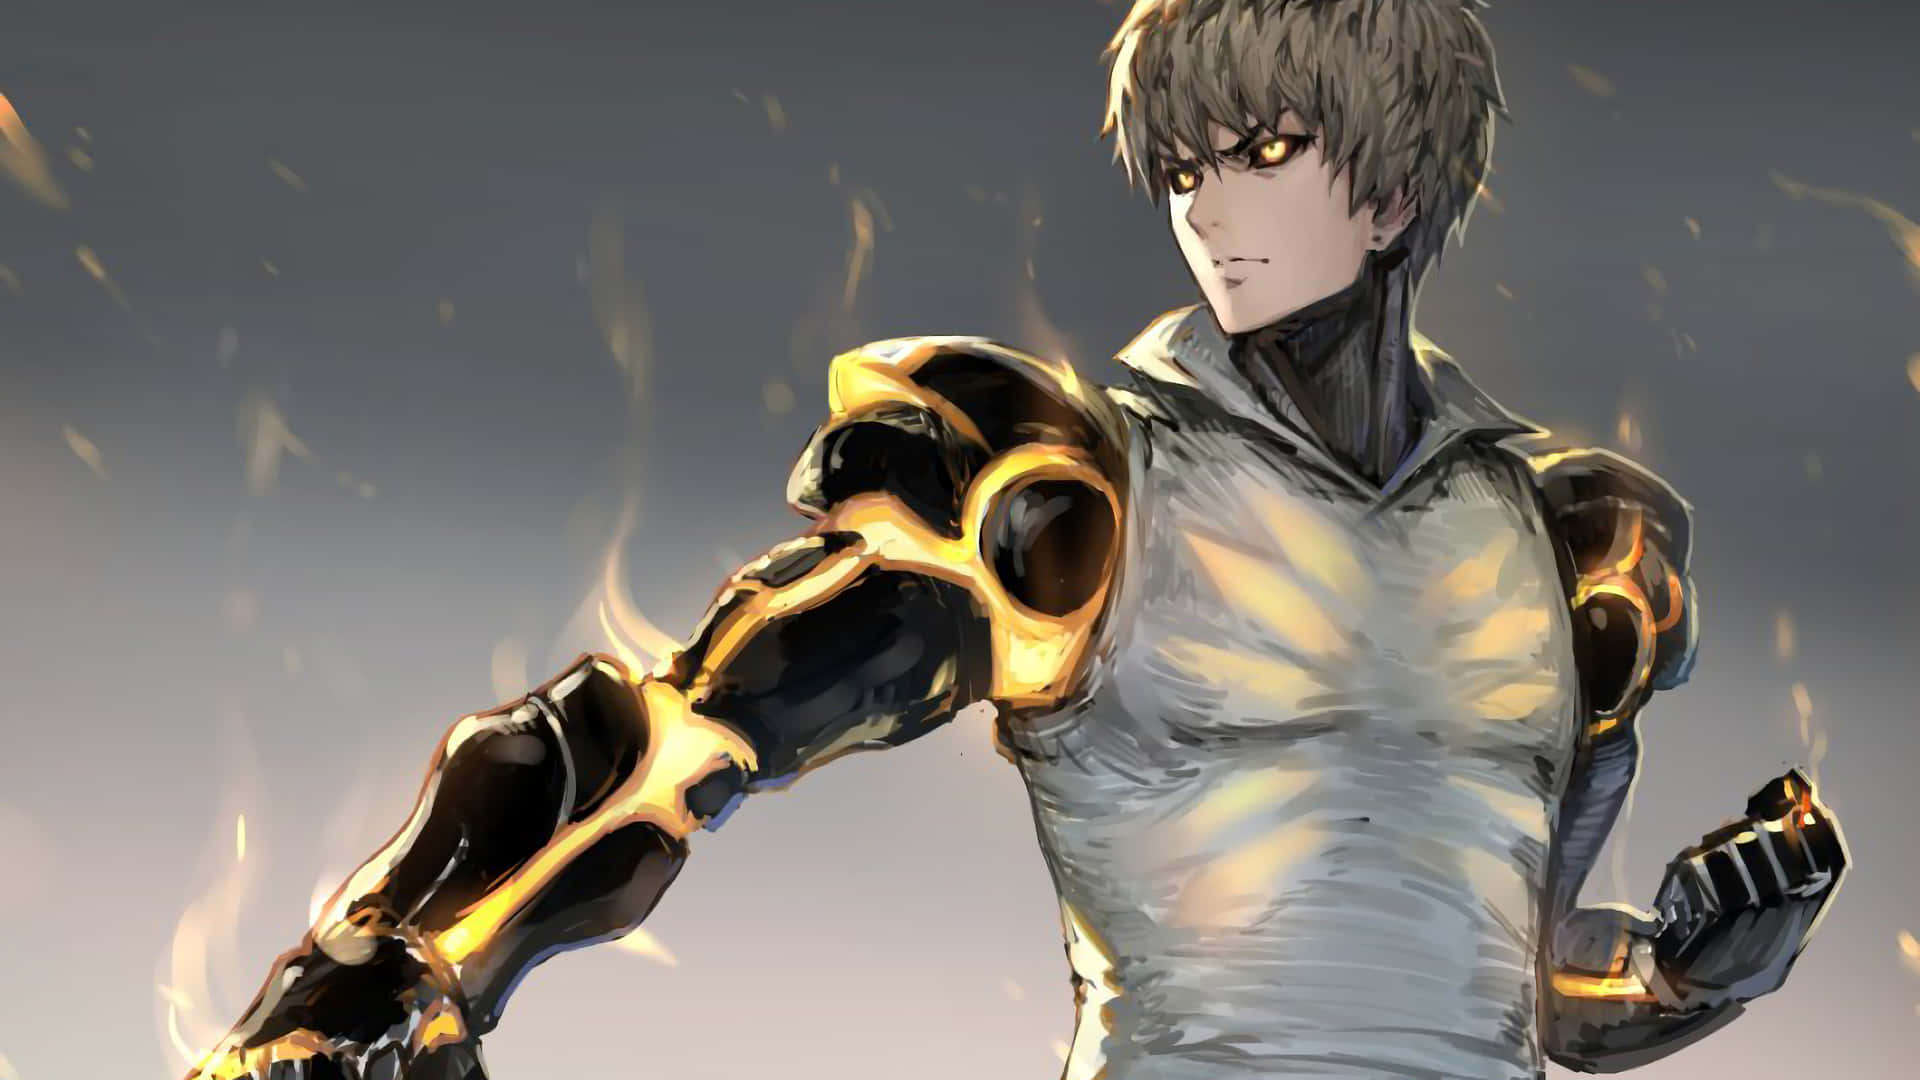 Genos, The Powerful Cyborg in Action Wallpaper